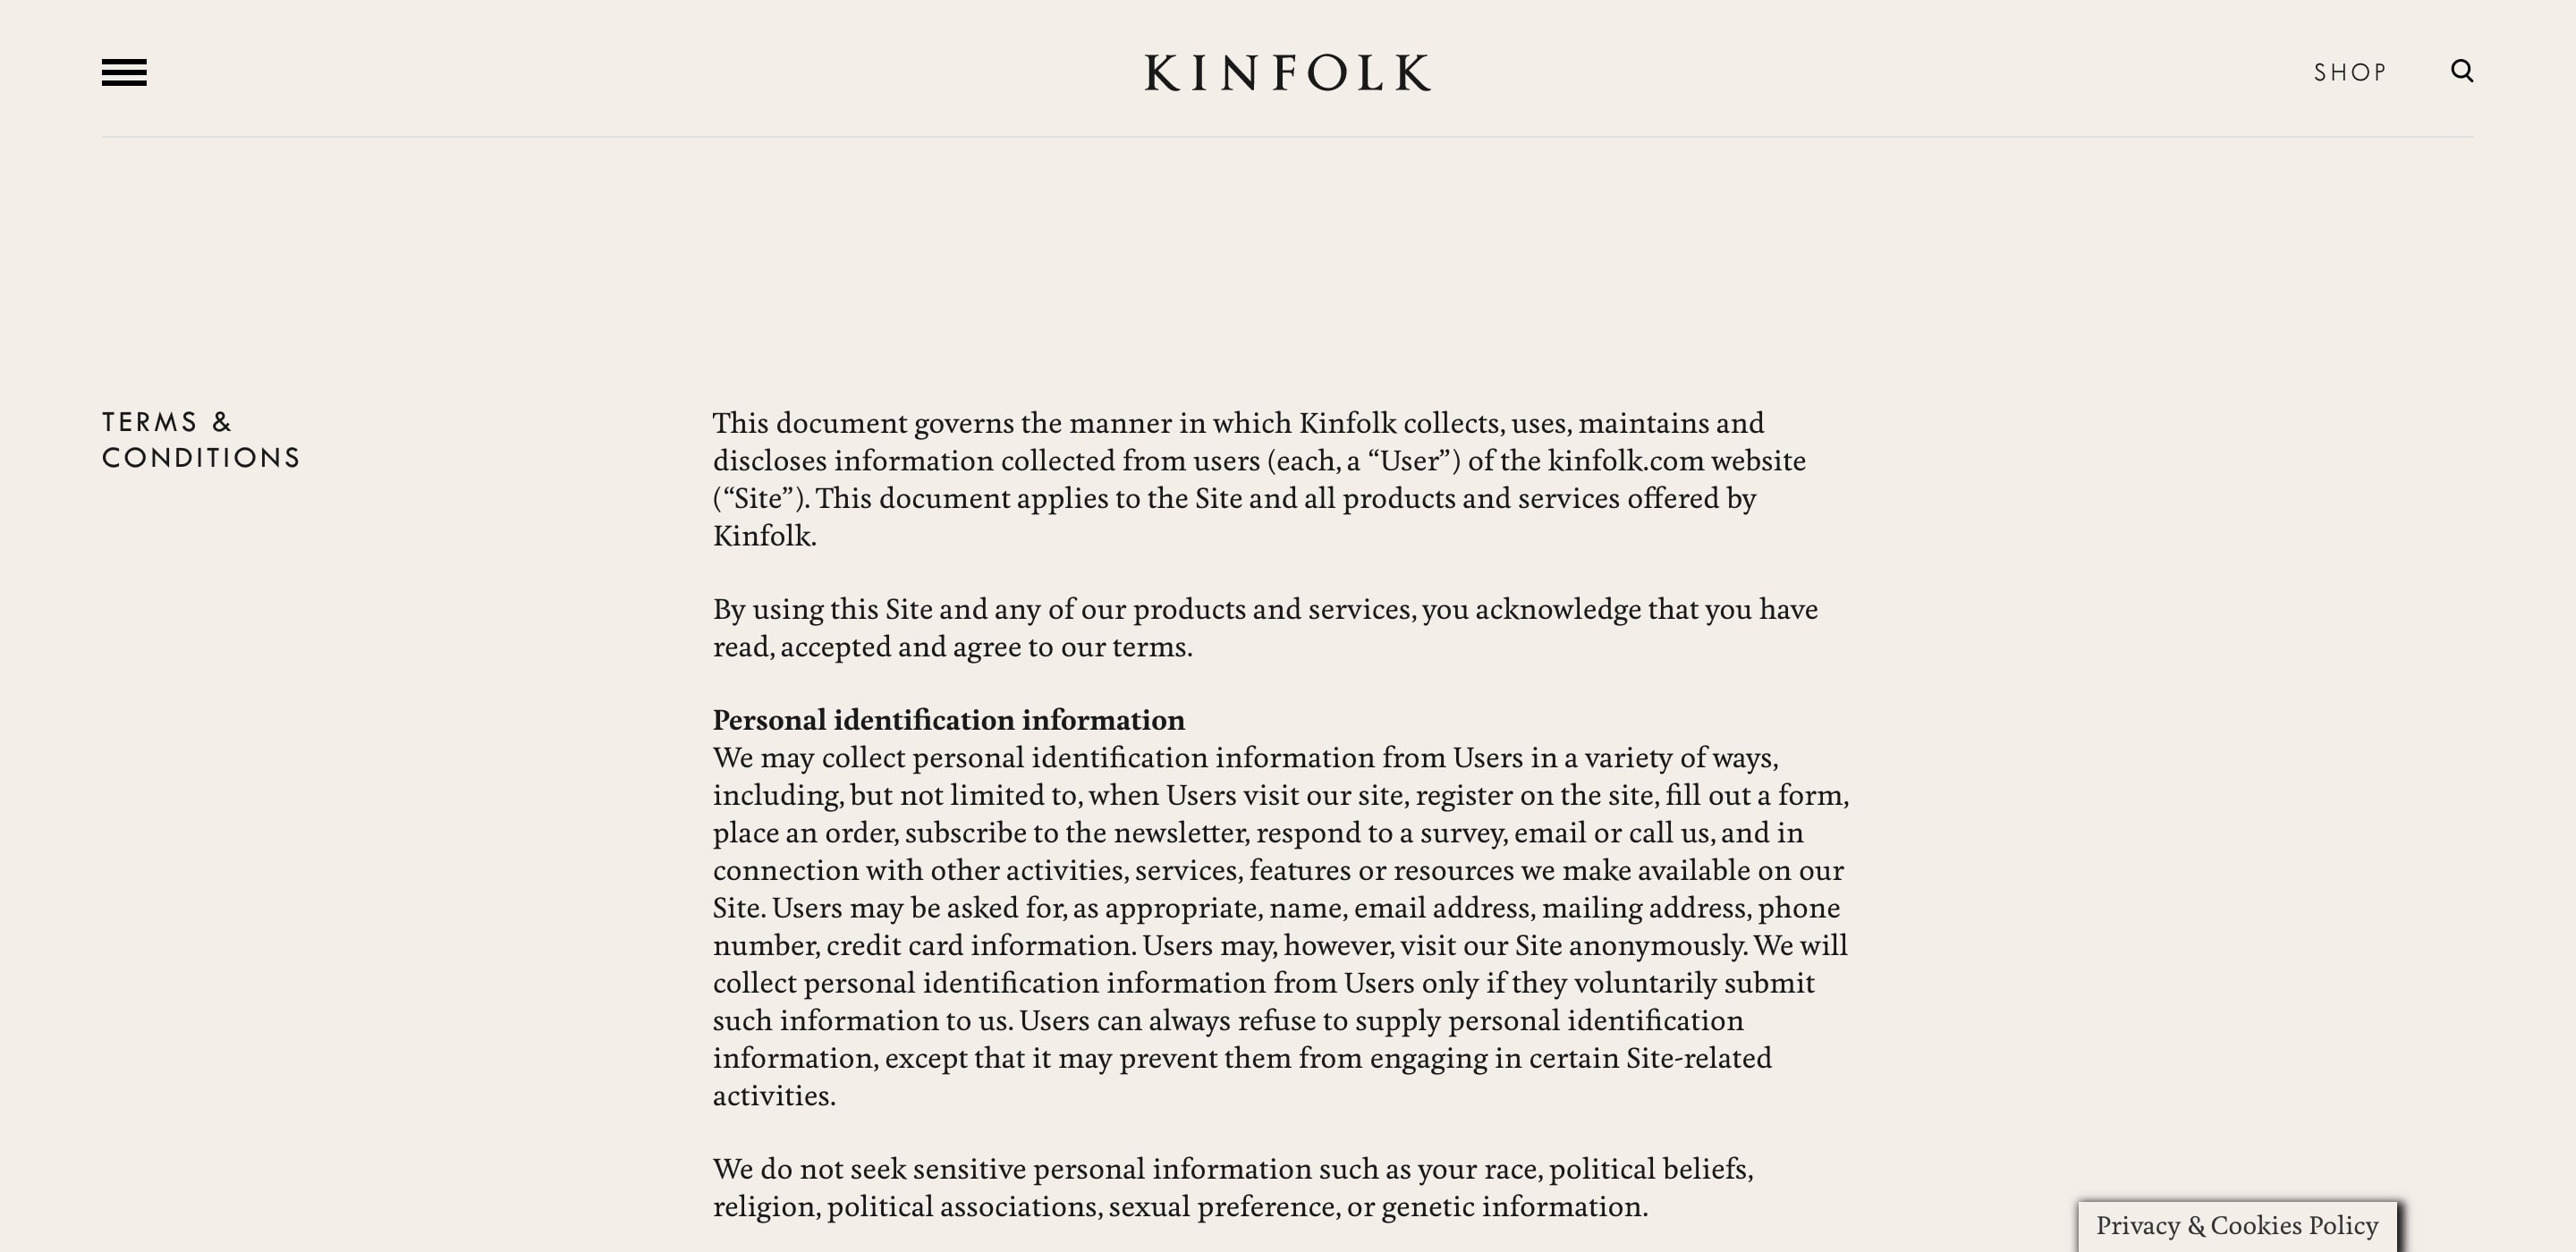 kinfolk terms and conditions page